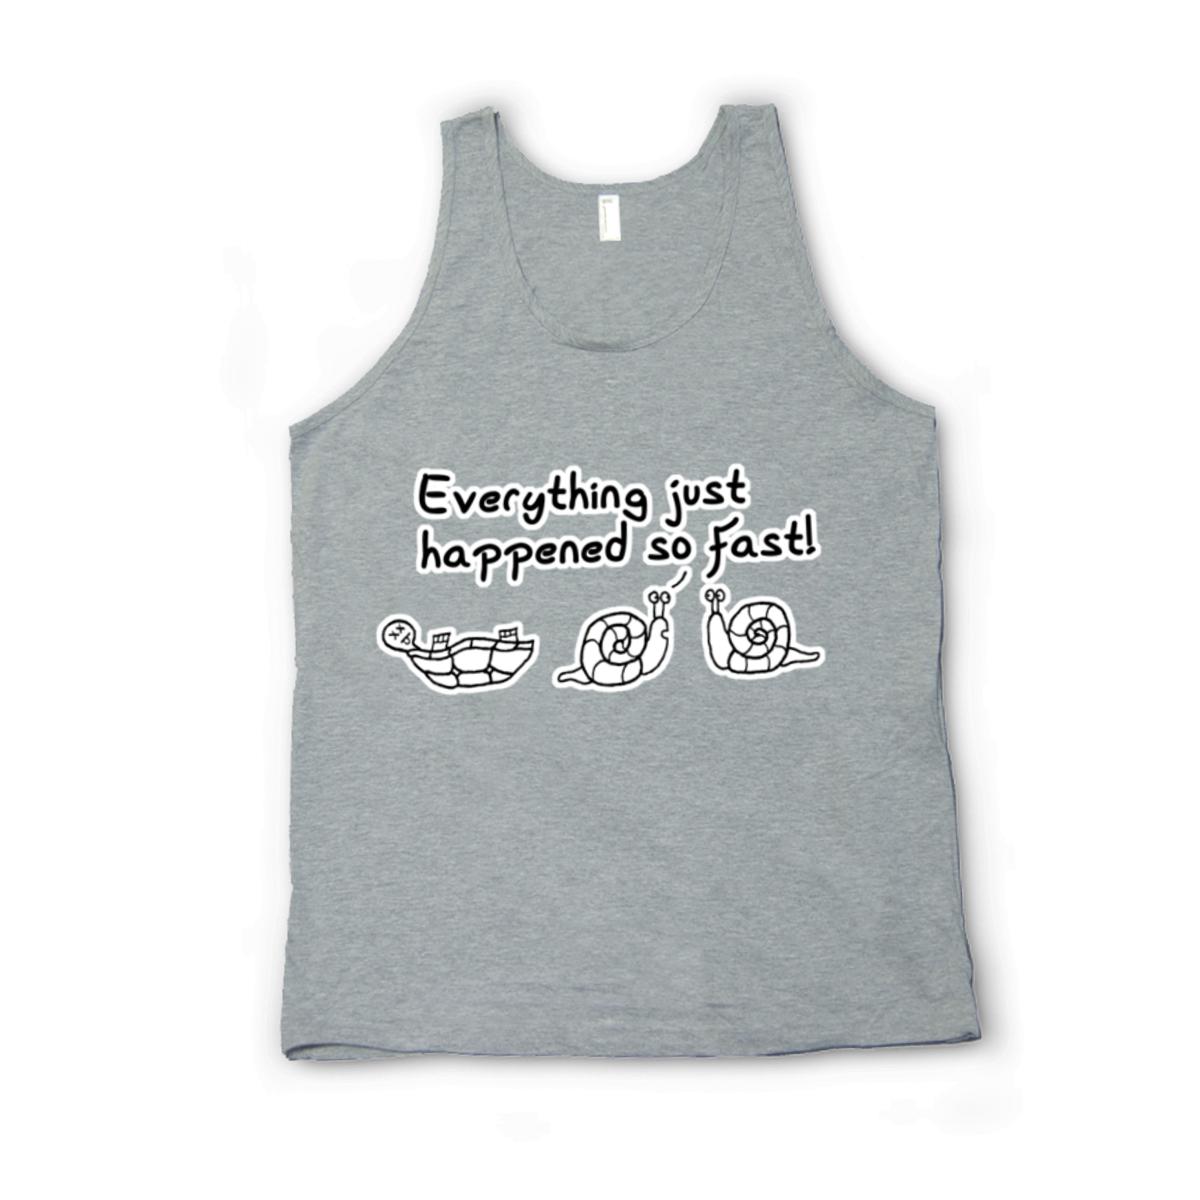 Happened So Fast Unisex Tank Top Double Extra Large heather-grey